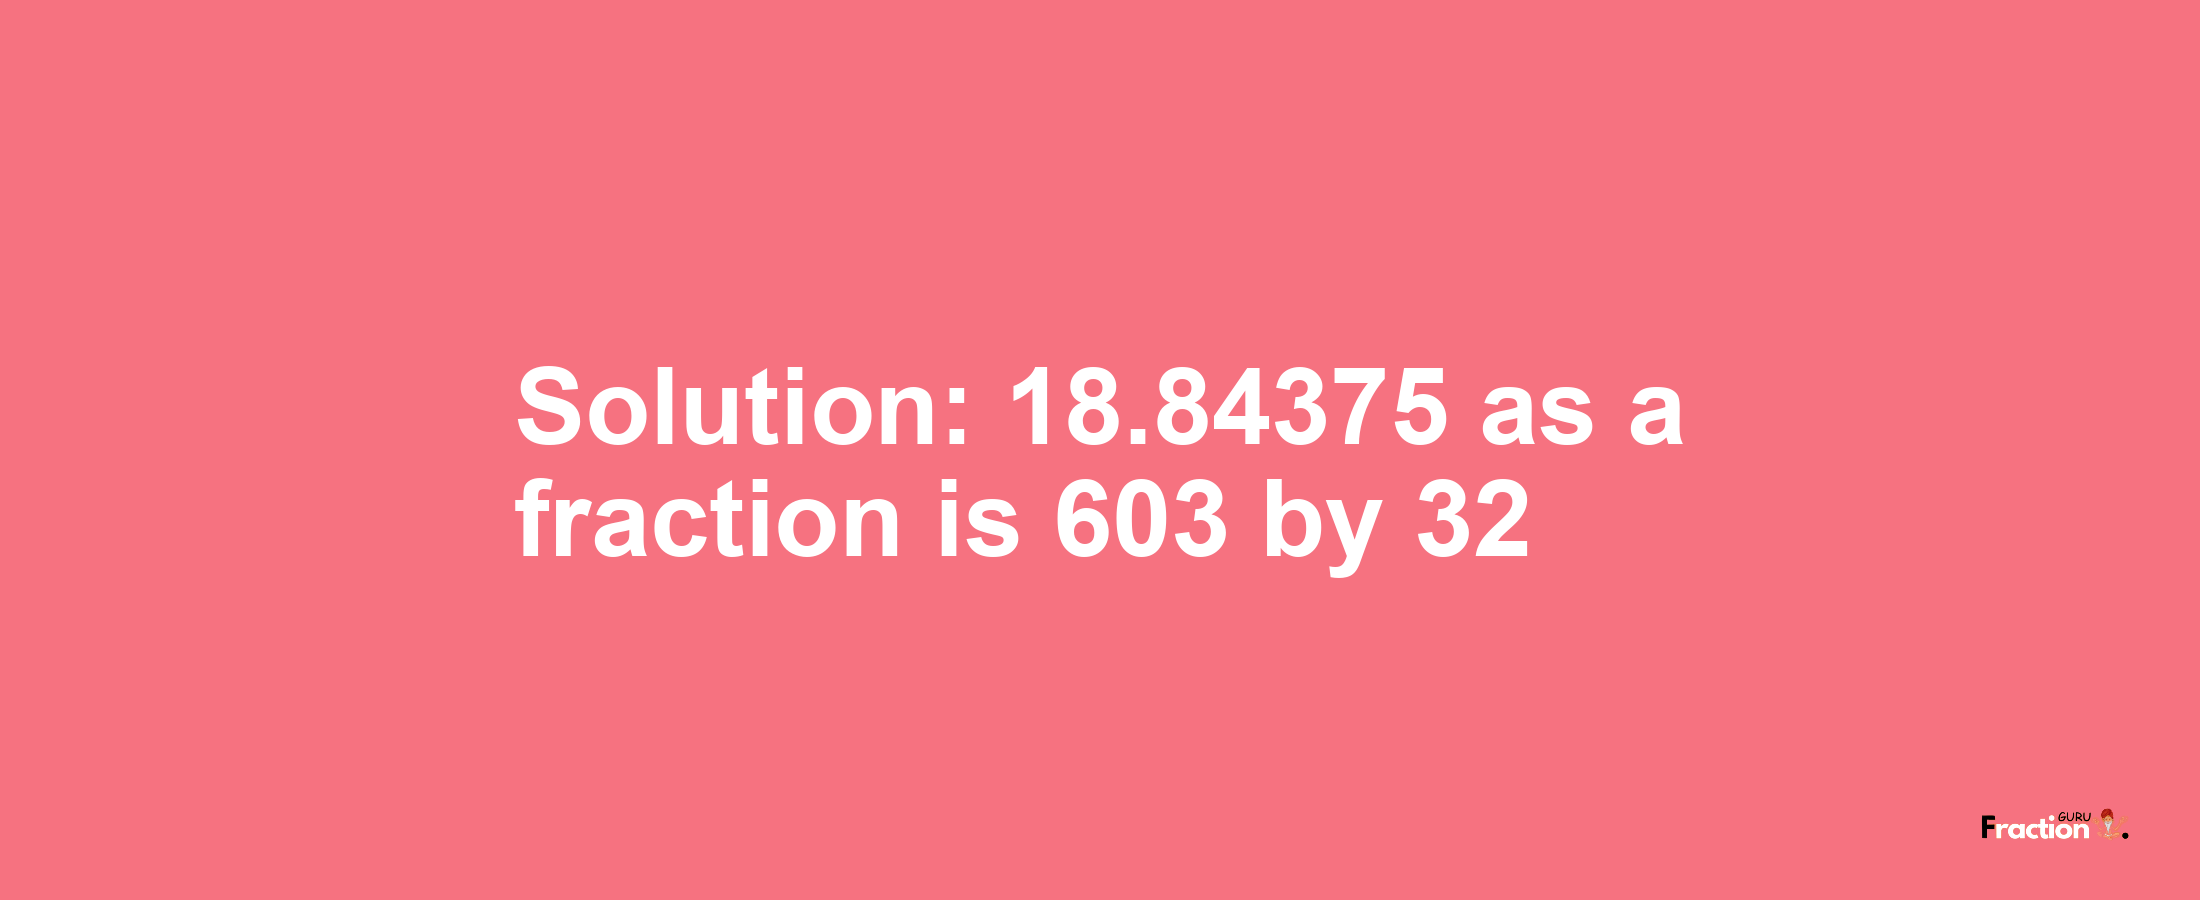 Solution:18.84375 as a fraction is 603/32